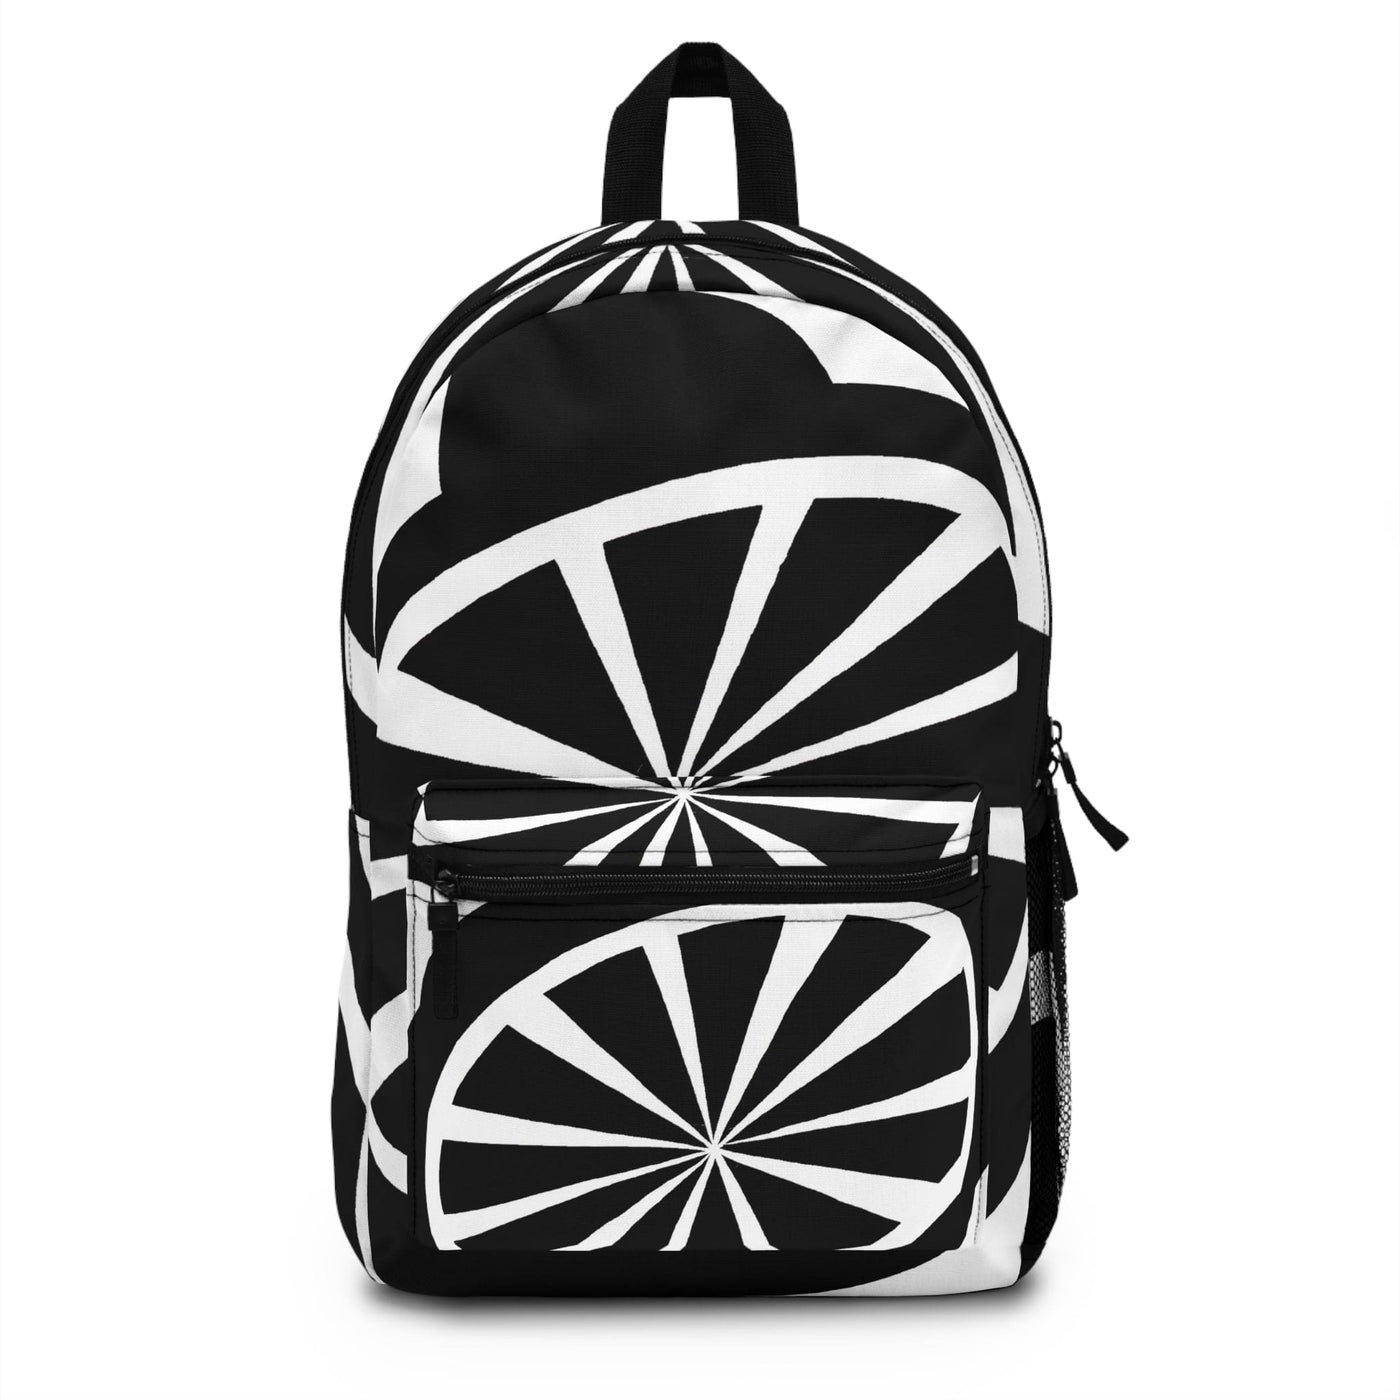 Backpack - Large Water - resistant Bag Black And White Geometric Pattern - Bags